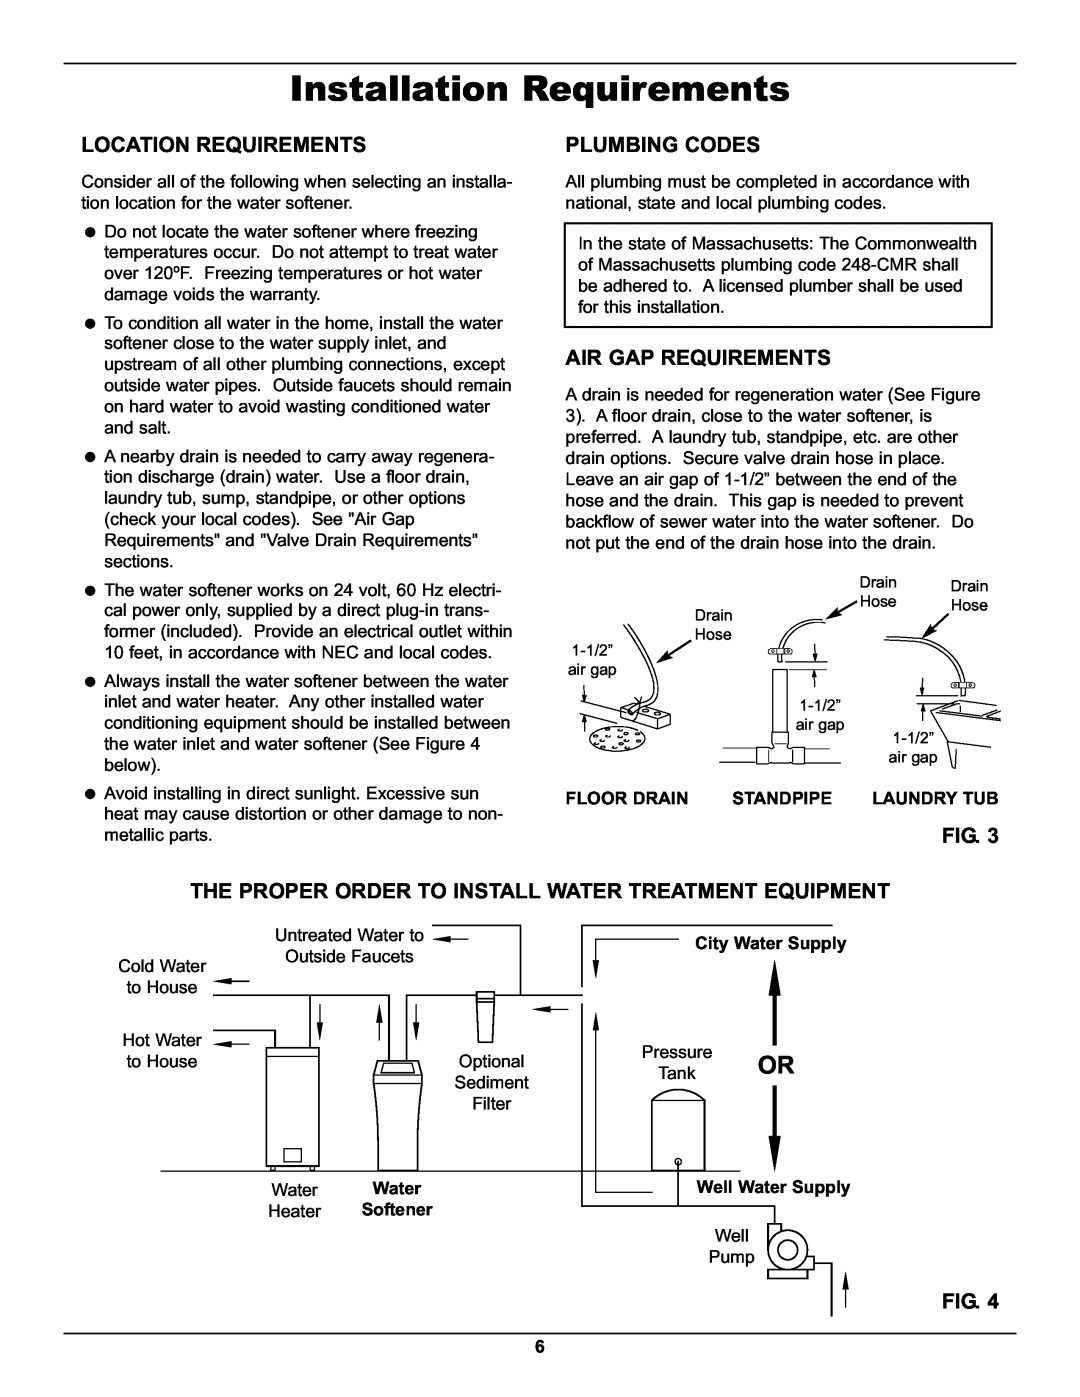 Whirlpool WHES40 operation manual Installation Requirements, Location Requirements, Plumbing Codes, Air Gap Requirements 